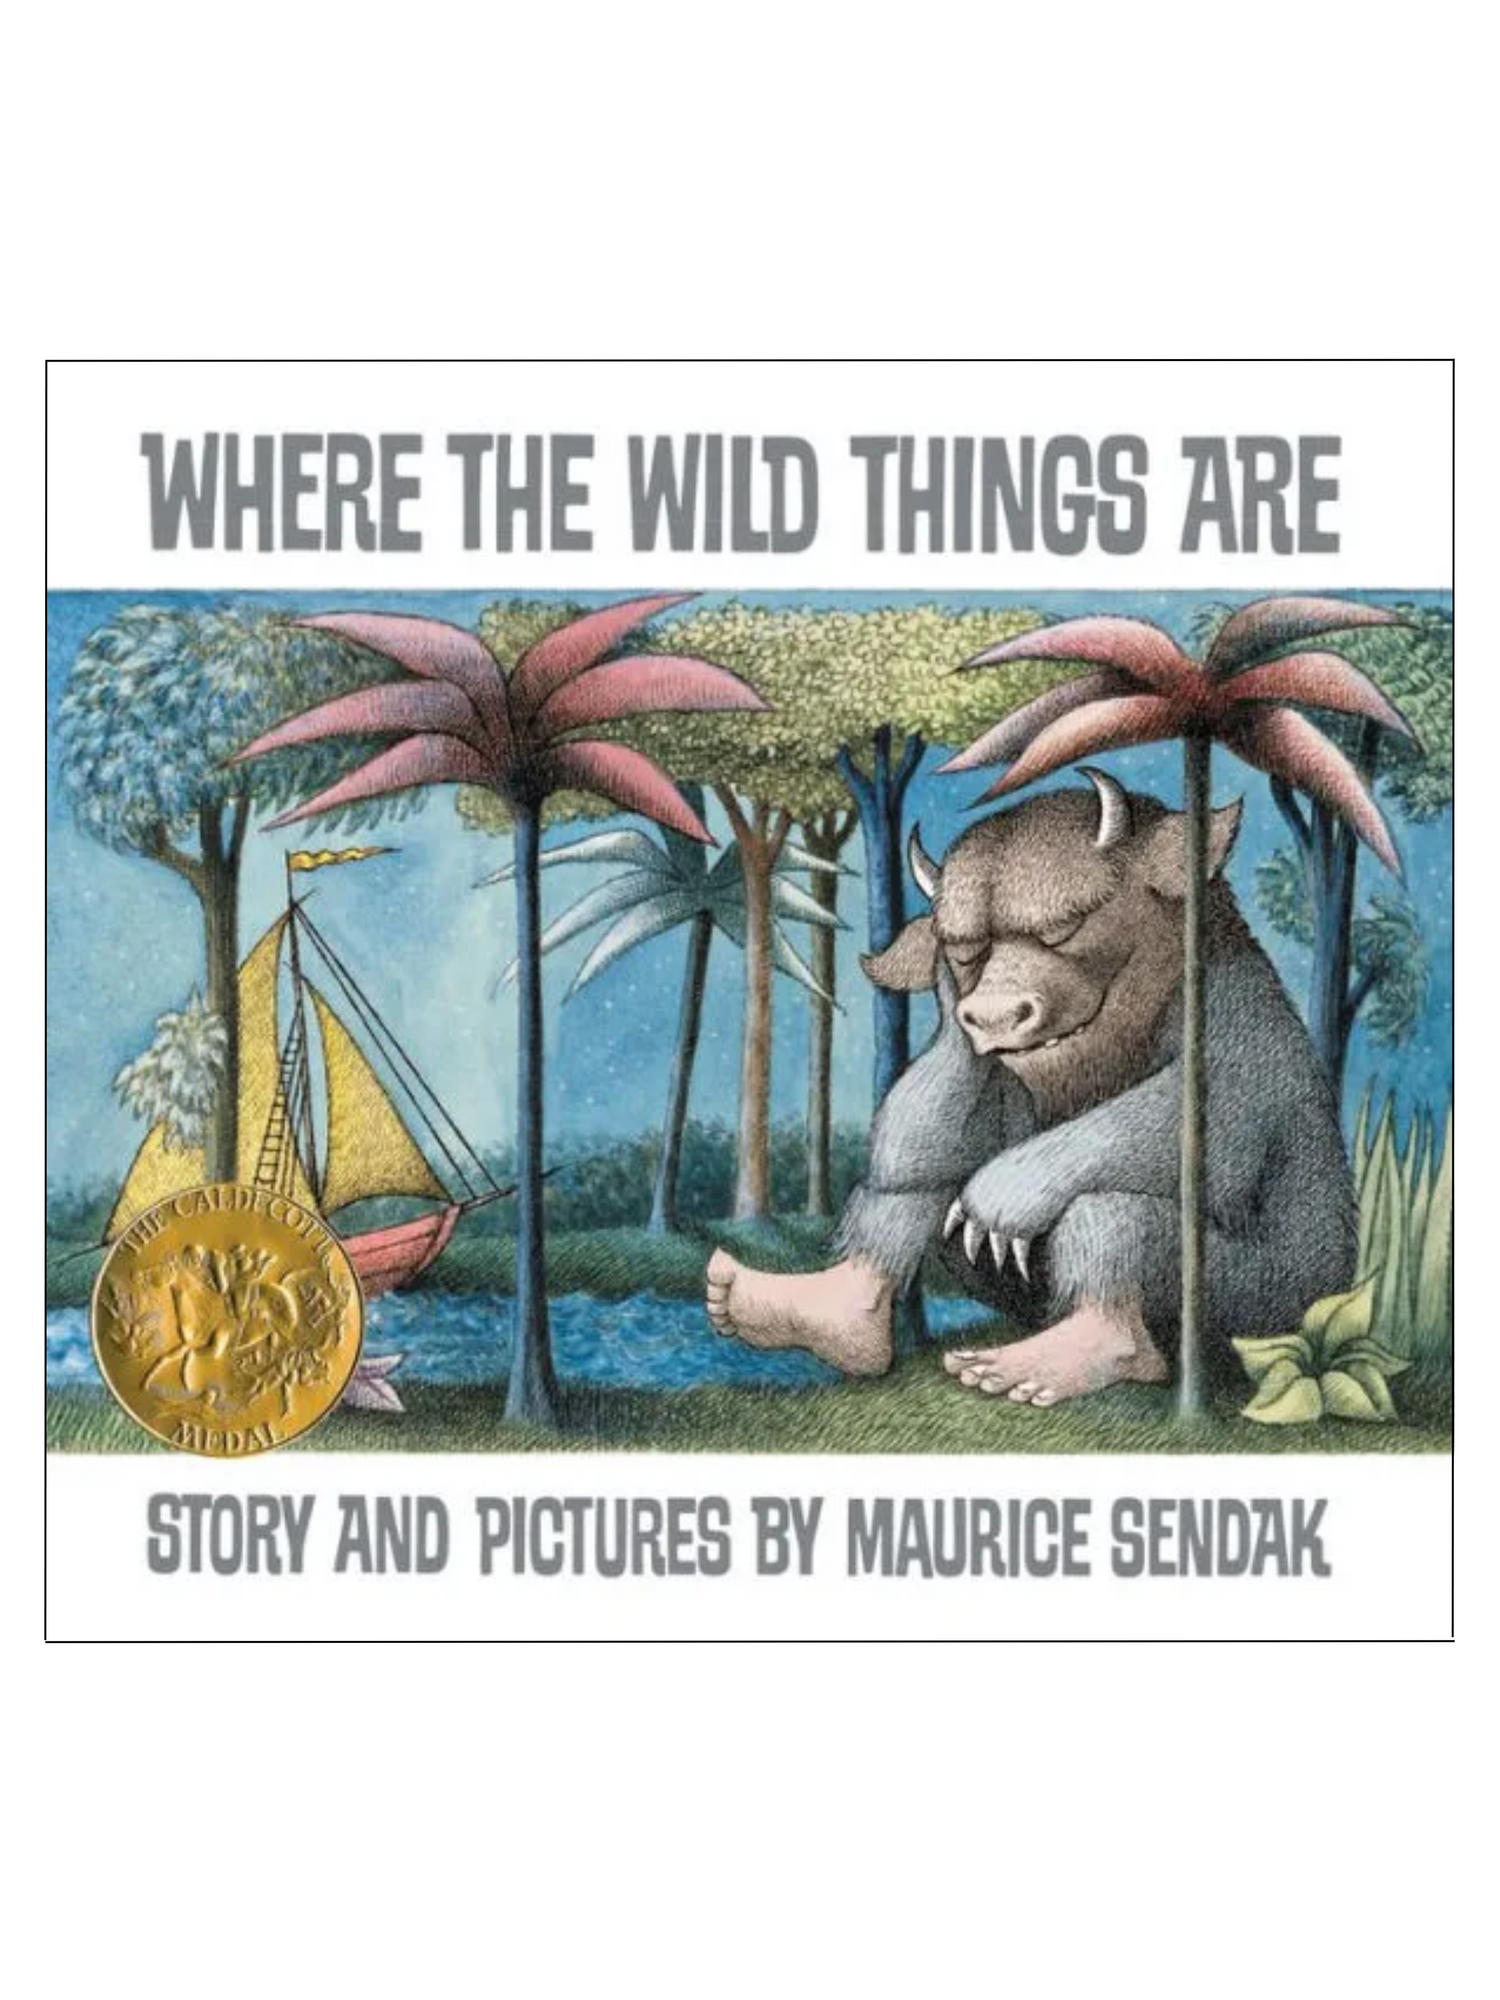 WHERE THE WILD THINGS ARE CHILDREN'S BOOK - THE LITTLE EAGLE BOUTIQUE